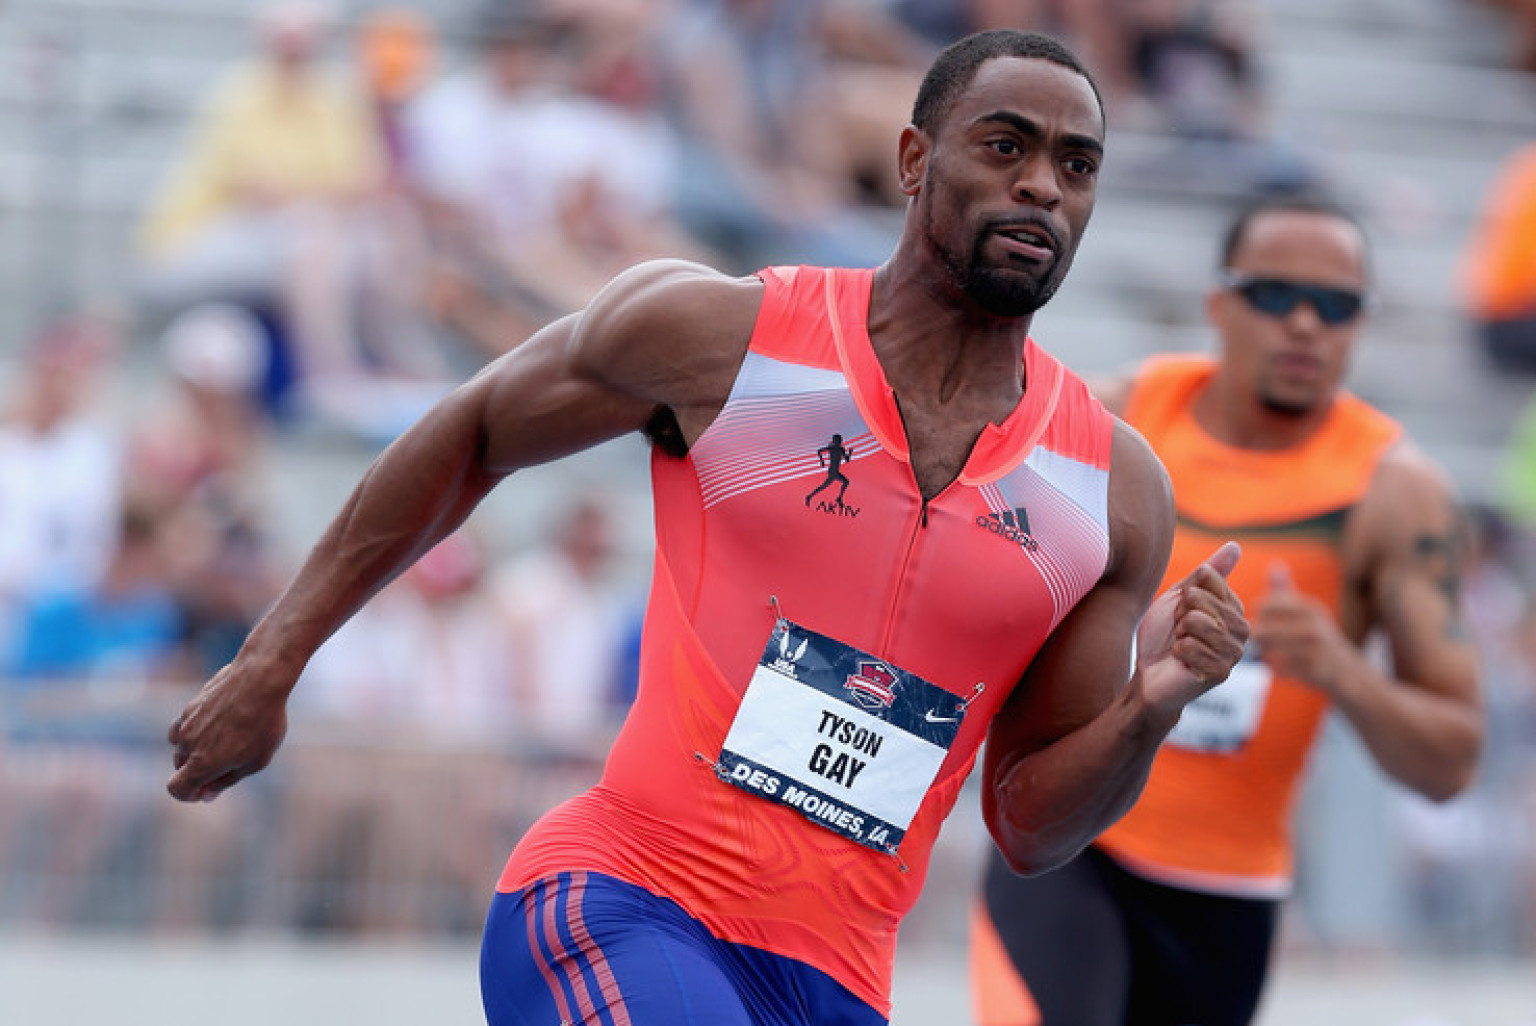 Gay wins 100m heat, Goule 2nd in 400m at NTC Spring Invitational